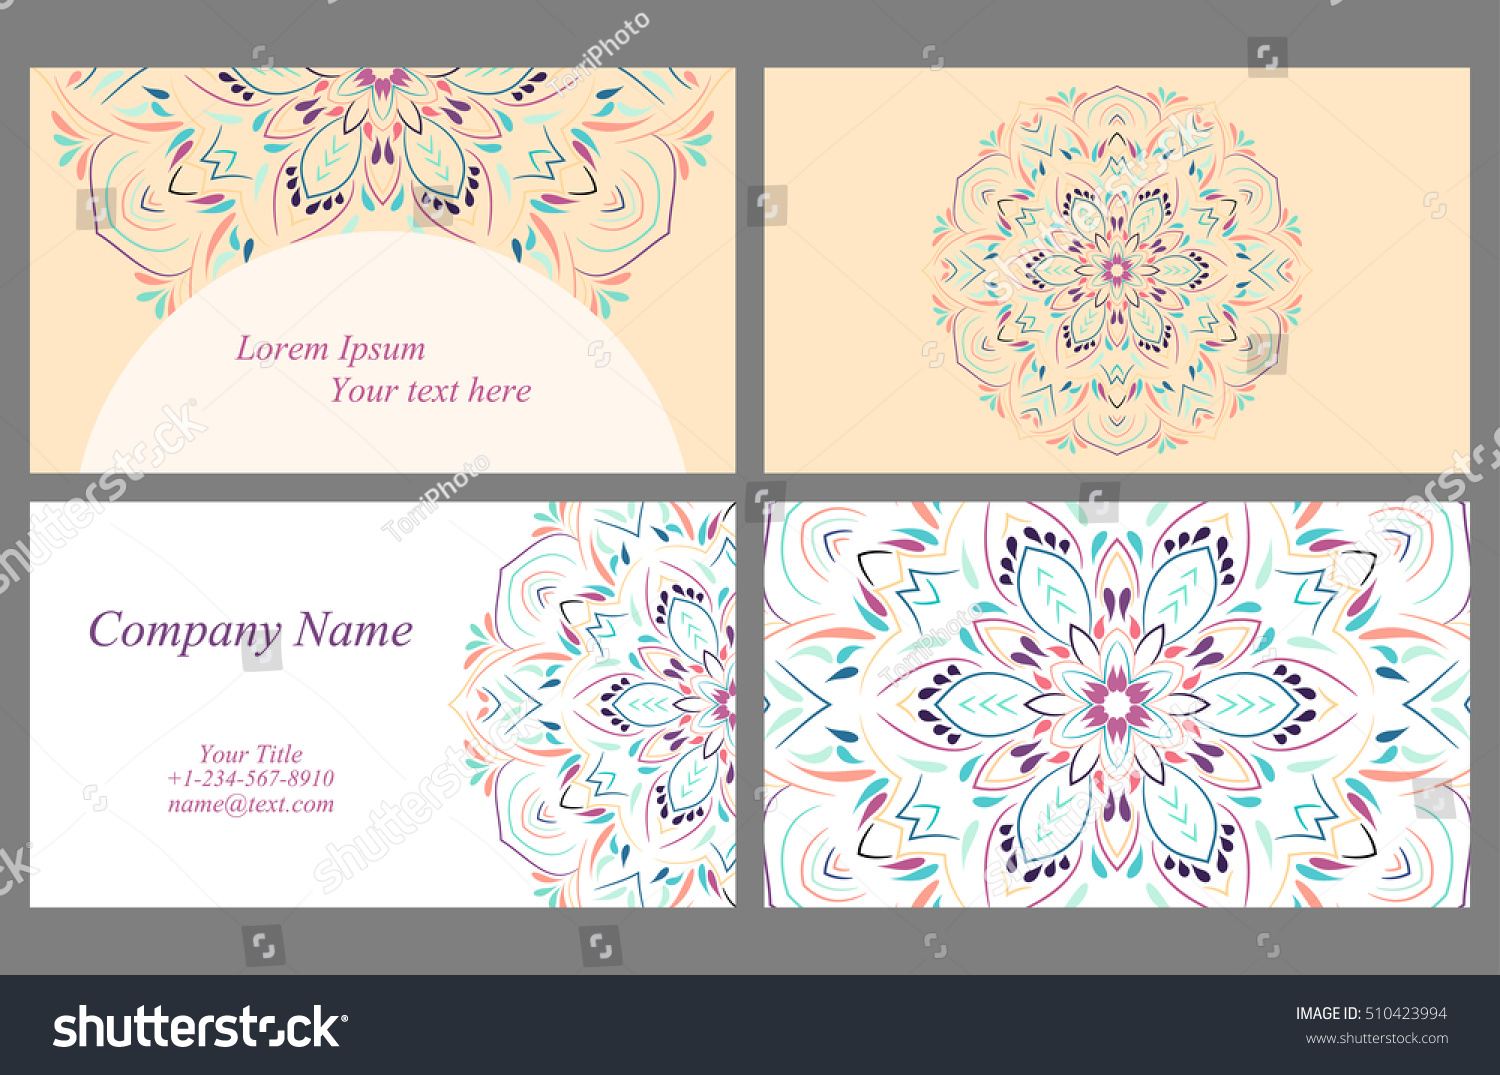 https://www.shutterstock.com/pic-510423994/stock-vector-set-of-elegance-pastel-colored-business-card-or-invitation-templates-with-abstract-floral-design-vector-illustration-eps-8.html